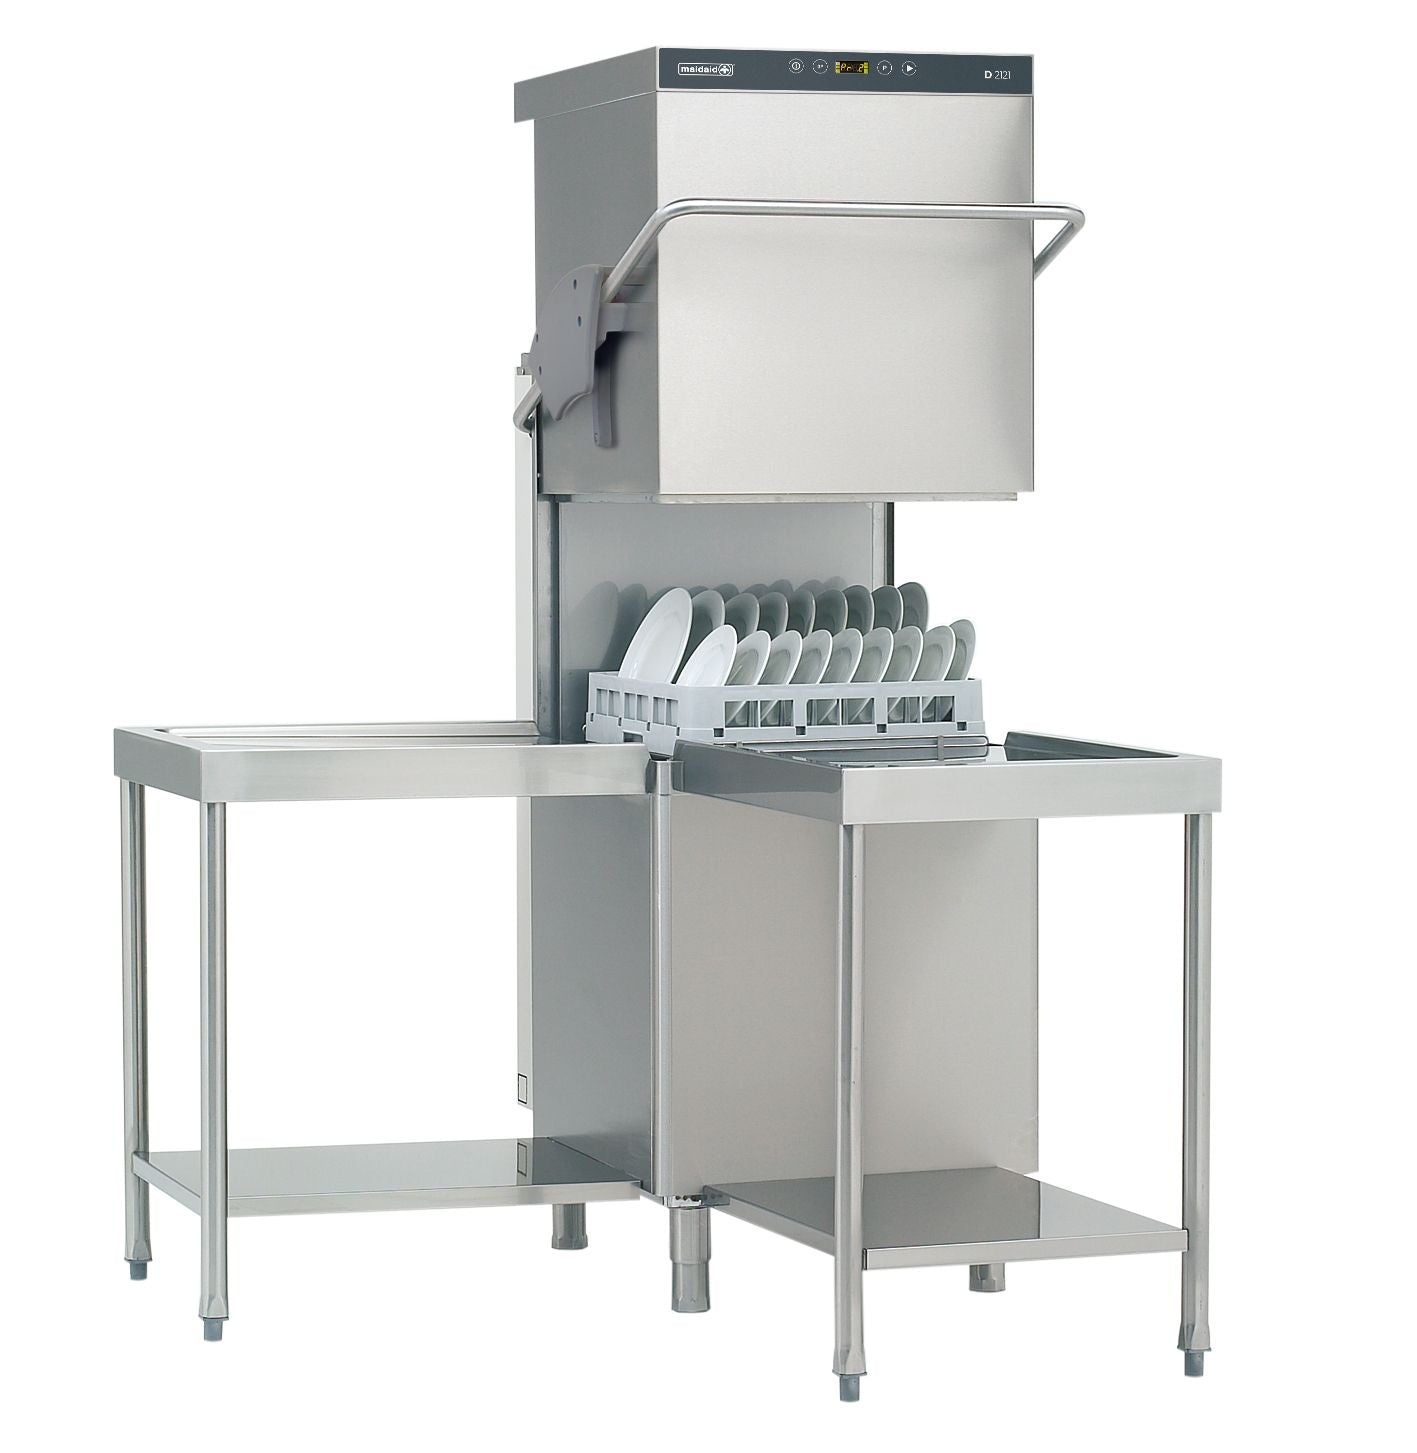 Maidaid Halcyon D2121 Passthrough Dishwasher JD Catering Equipment Solutions Ltd